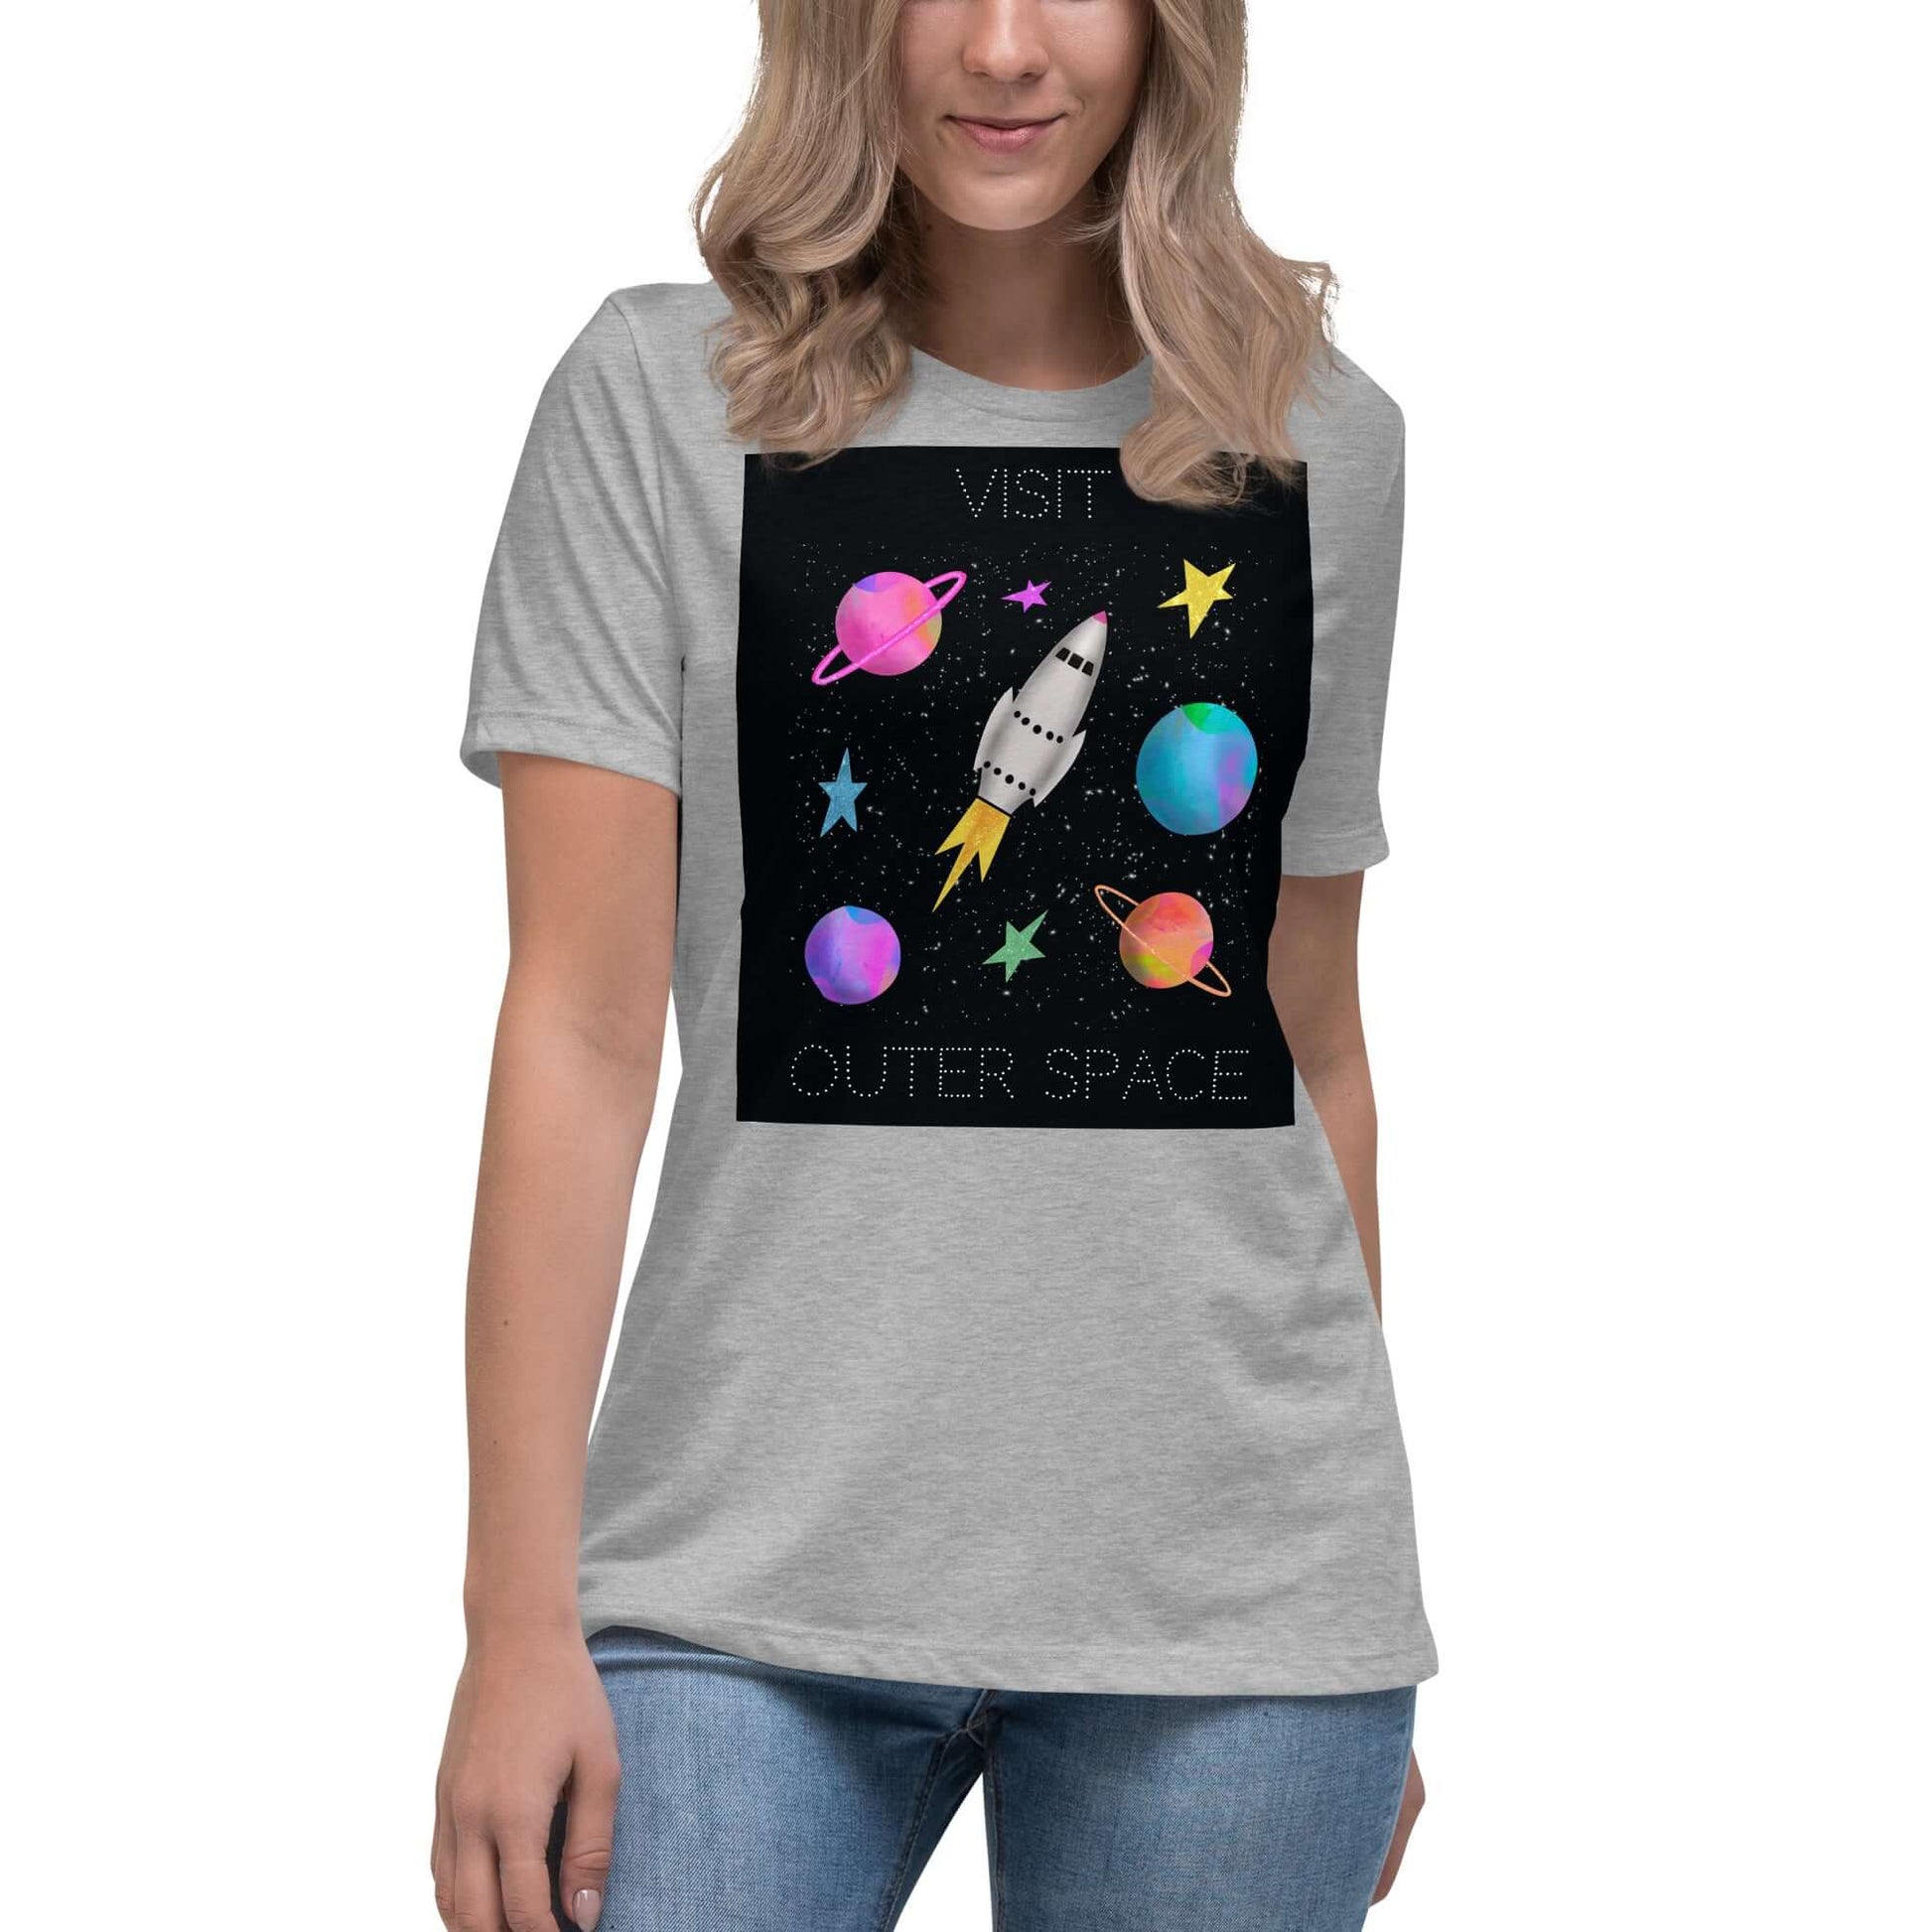 Whimsical Space Rocket with Colorful Planets and Stars on Black Background with Text “Visit Outer Space” Women’s Short Sleeve Tee in Athletic Heather Gray